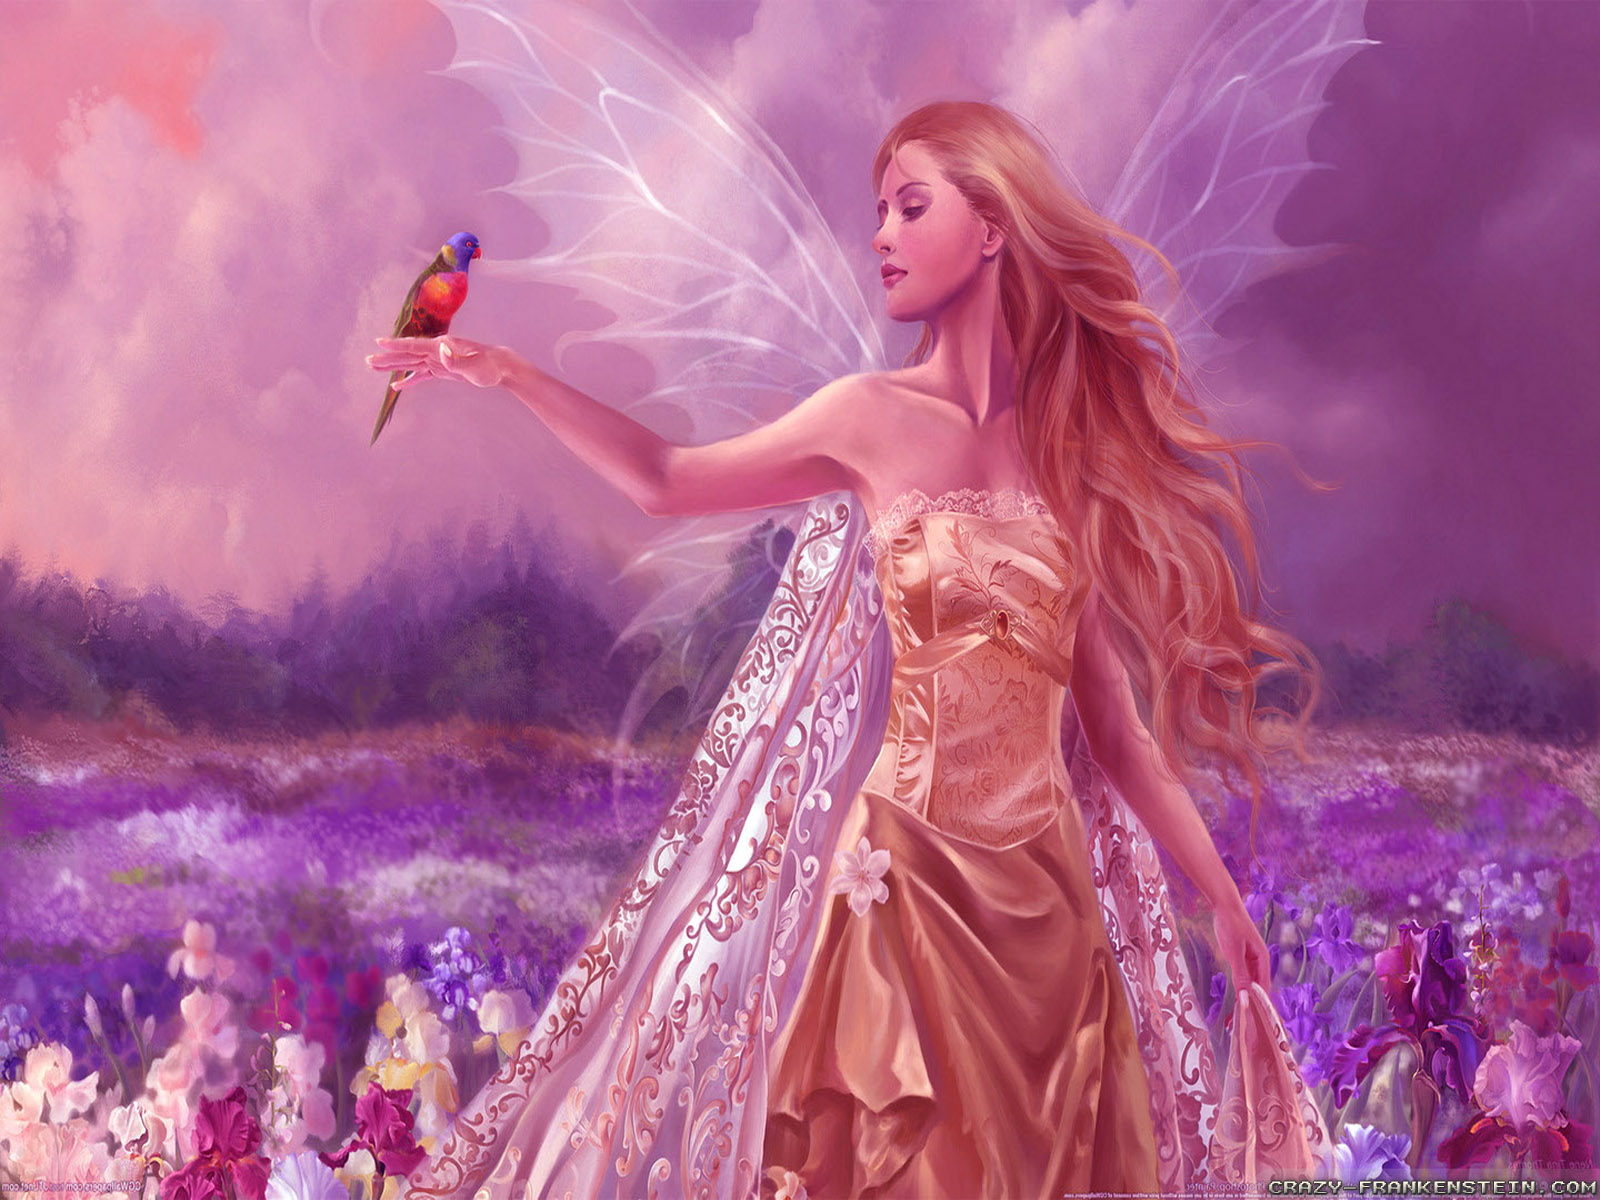 Beautiful Angel And Bird Animal HD Wallpaper Widescreen For PC Computer